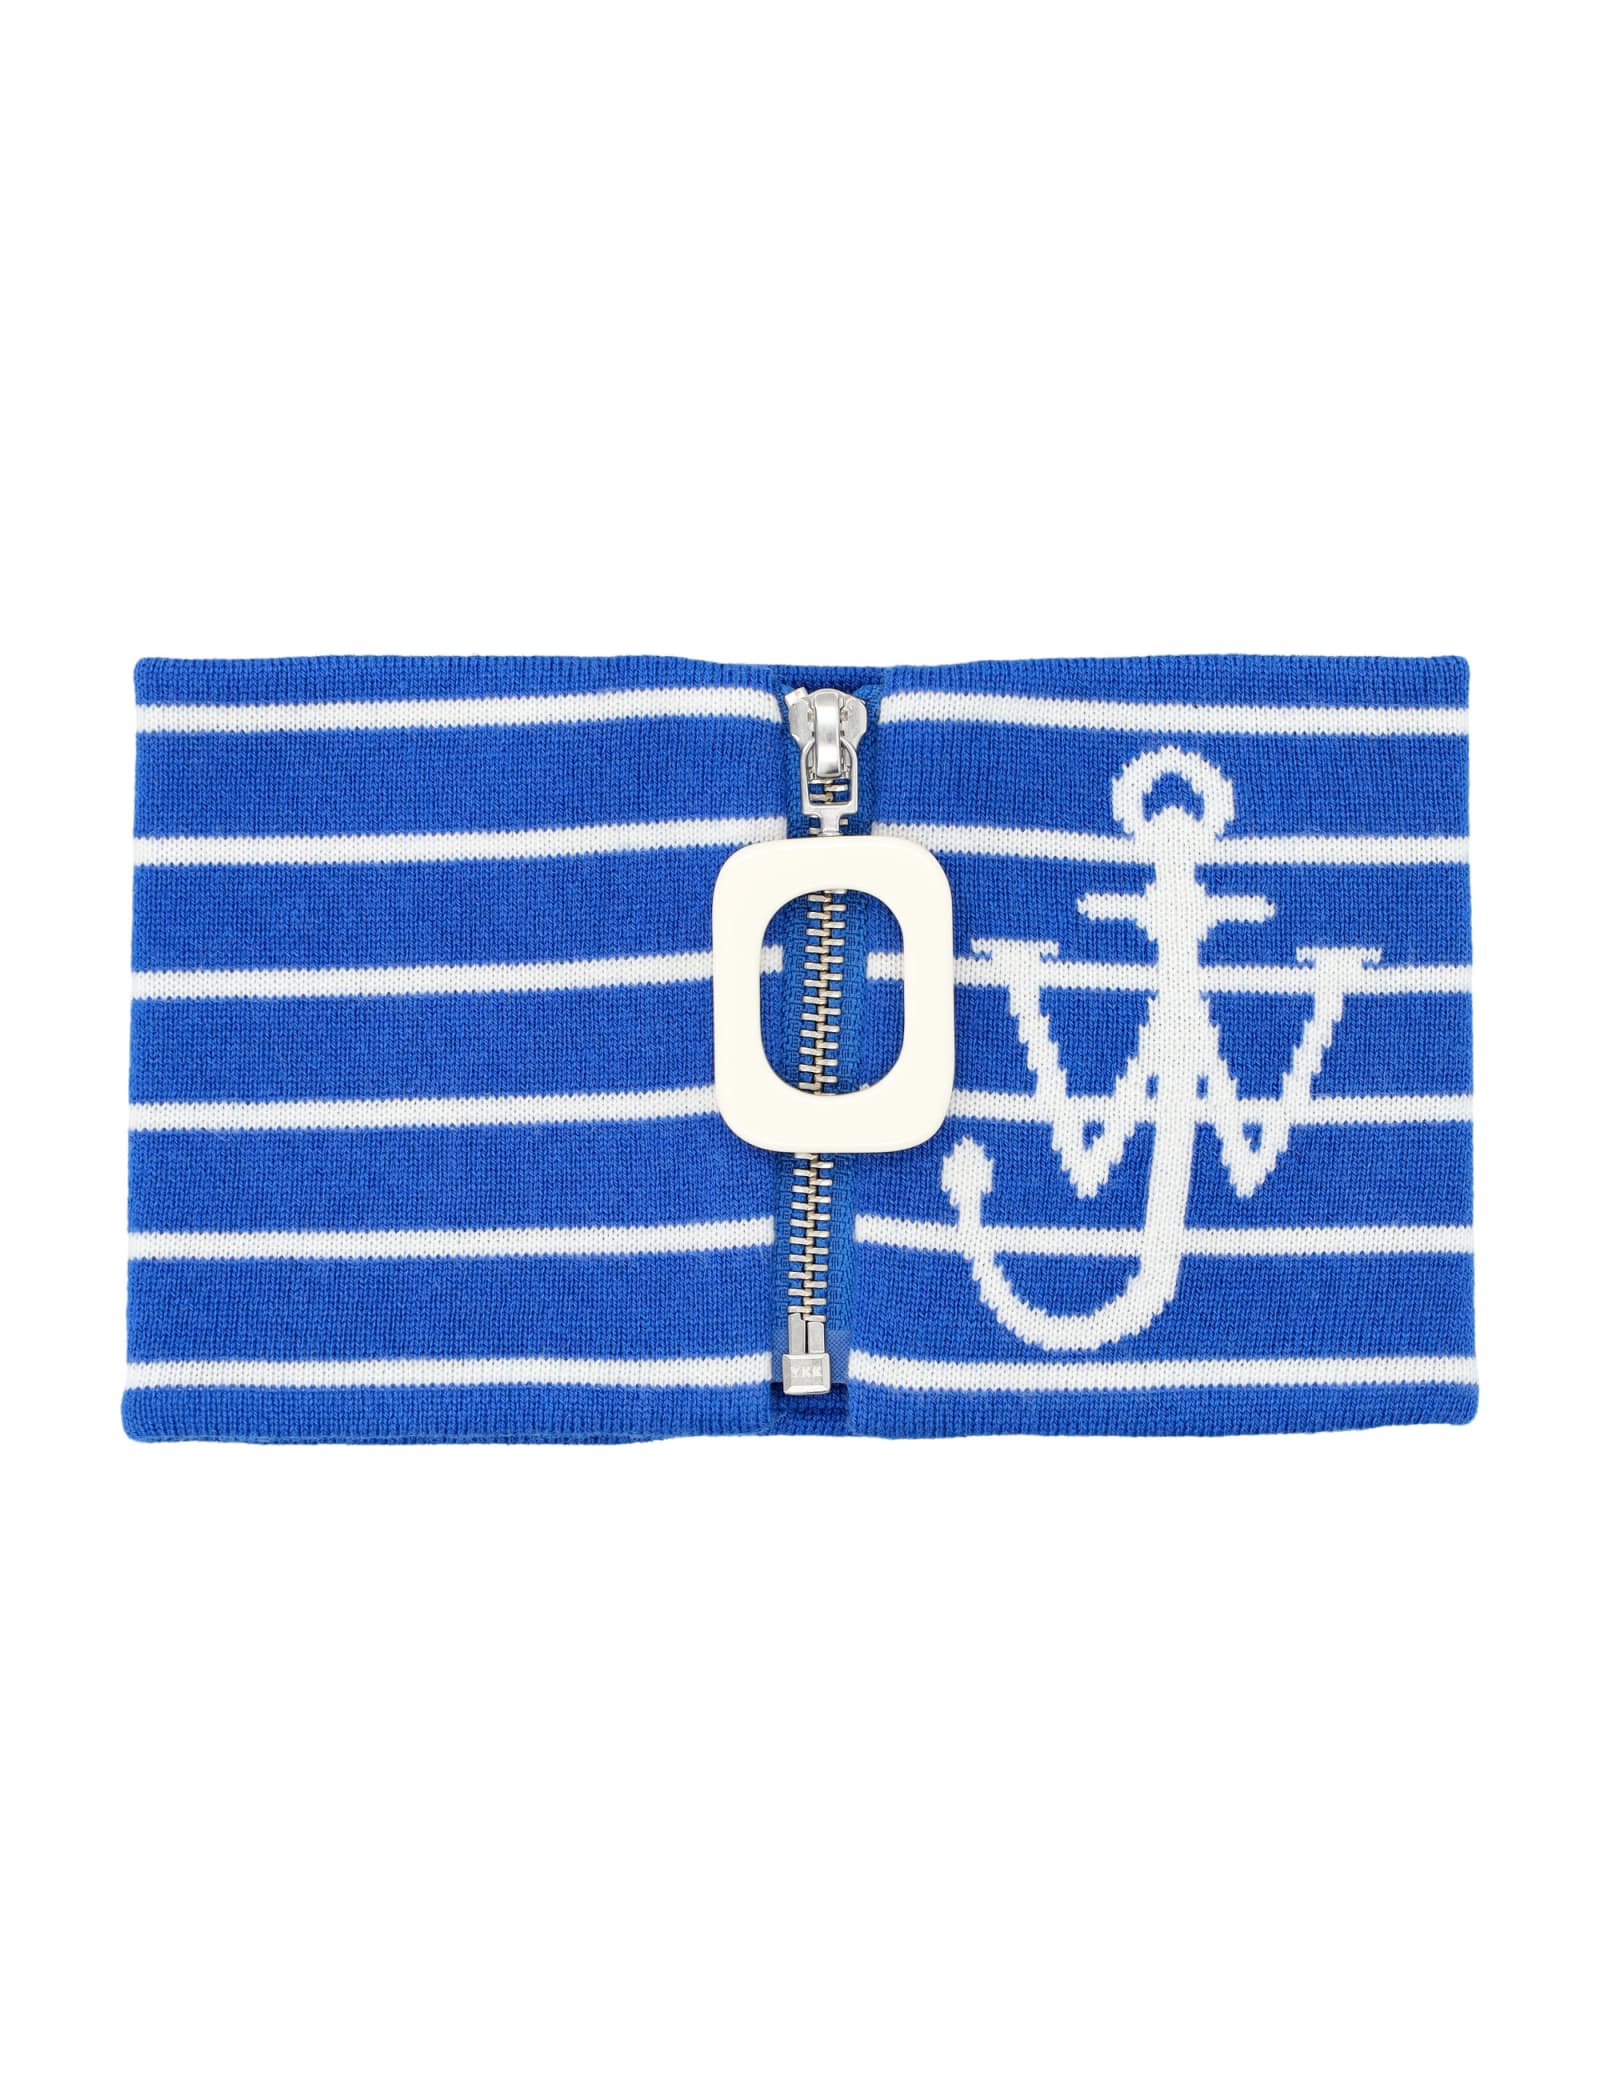 JW ANDERSON STRIPED ANCHOR NECKBAND